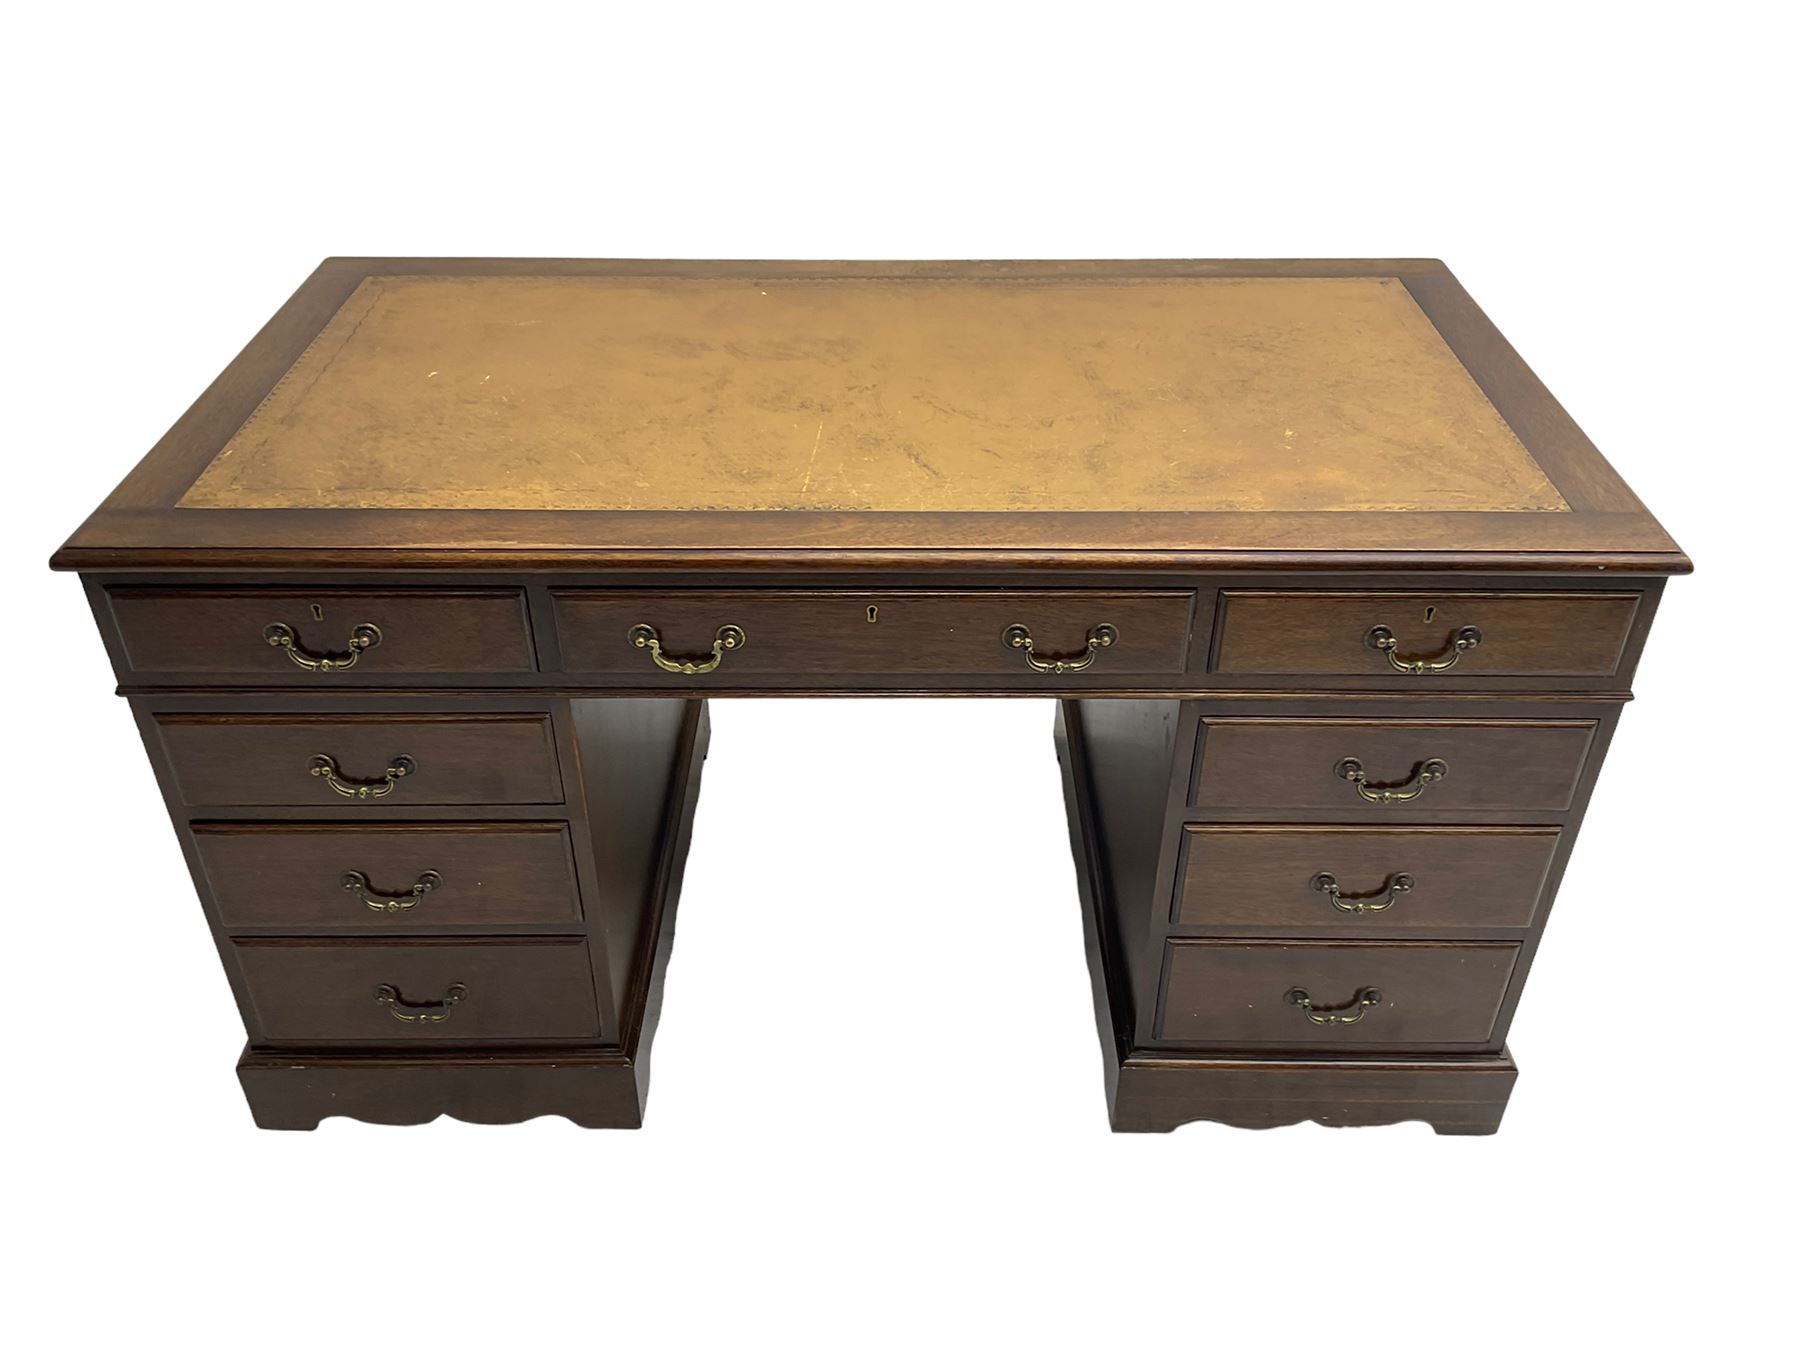 Early 20th century mahogany twin pedestal desk - Image 2 of 6